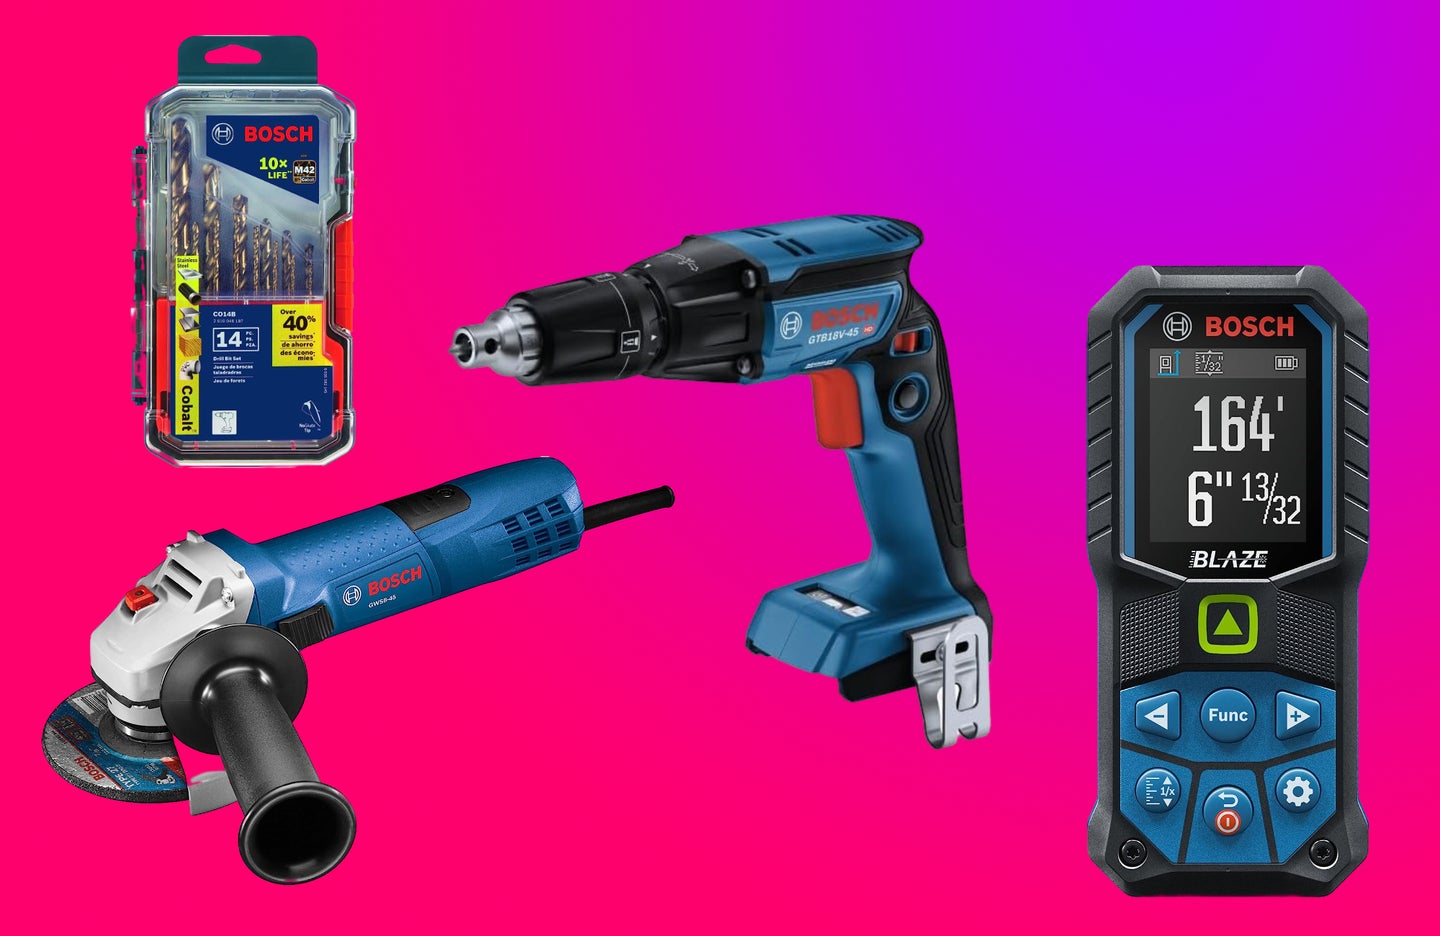 The Best Bosch Prime Day Deals